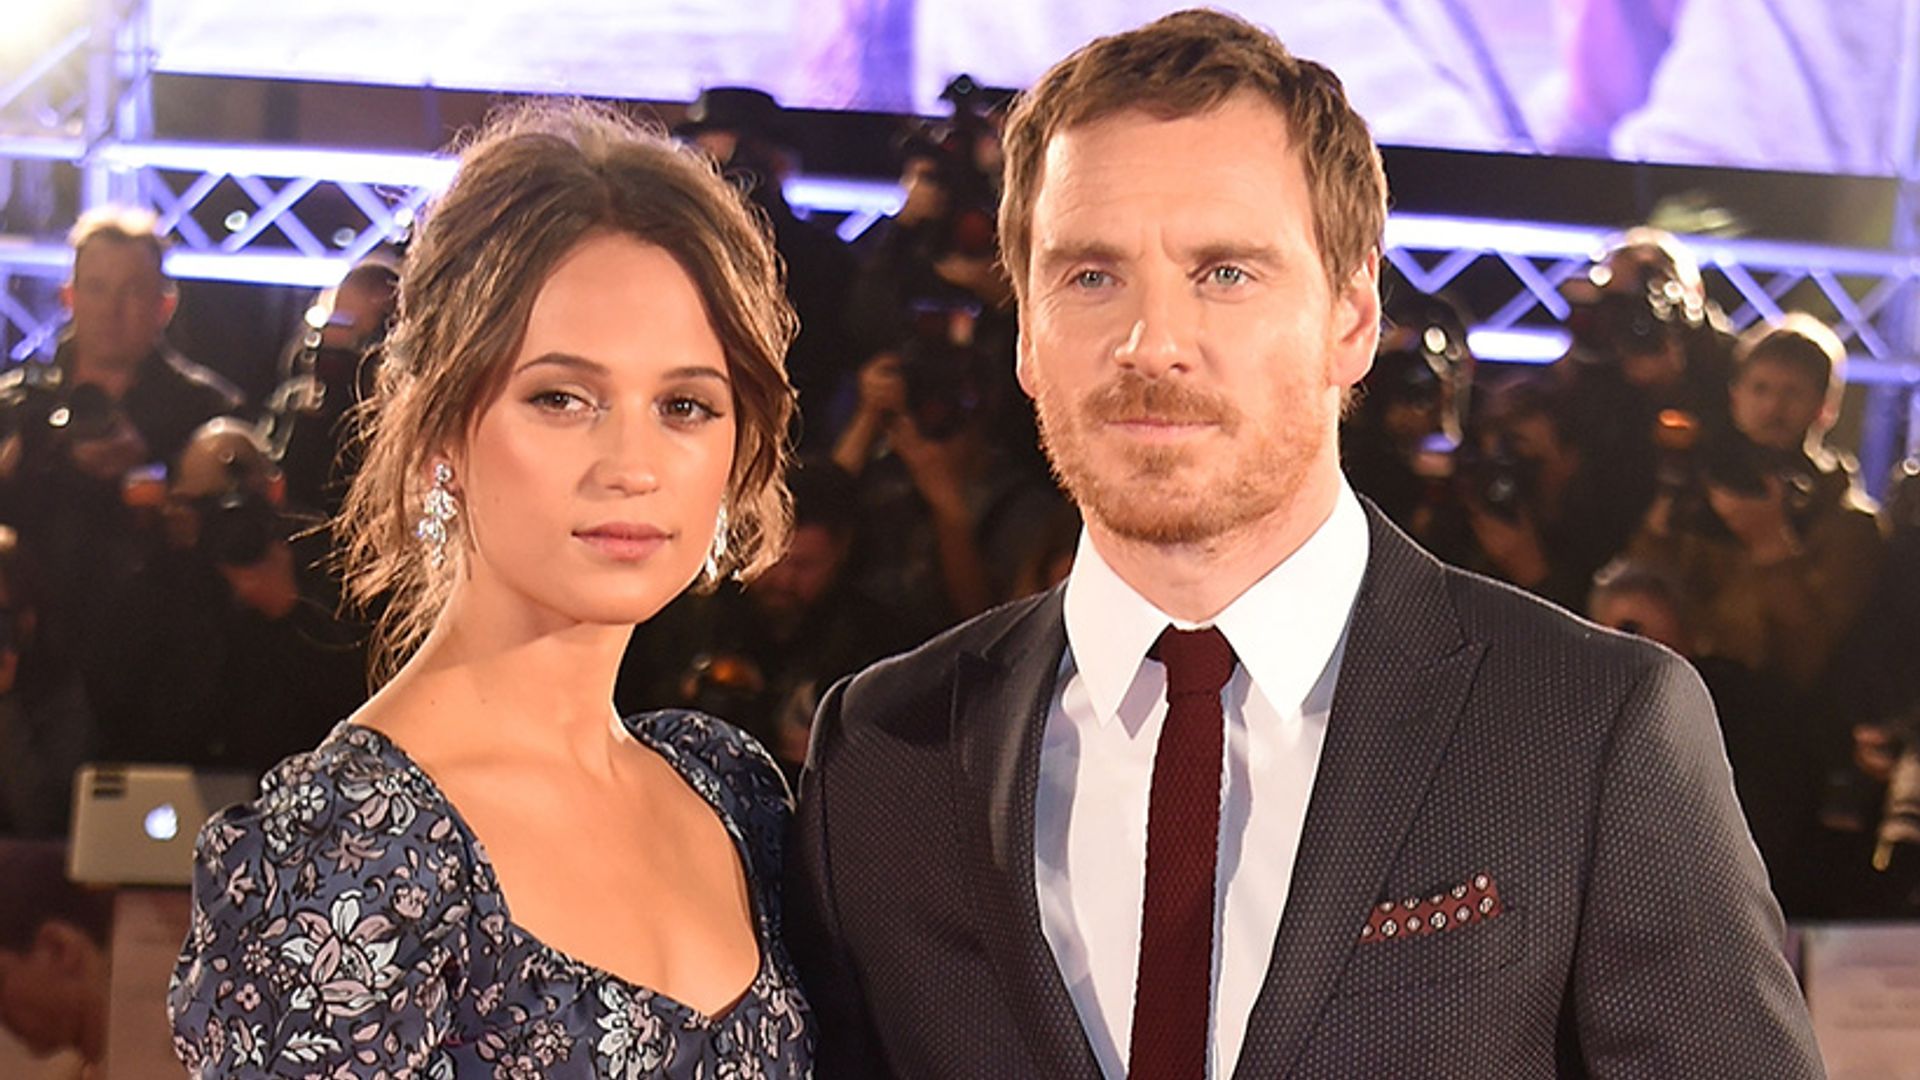 Michael Fassbender and Alicia Vikander 'secretly tie the knot'